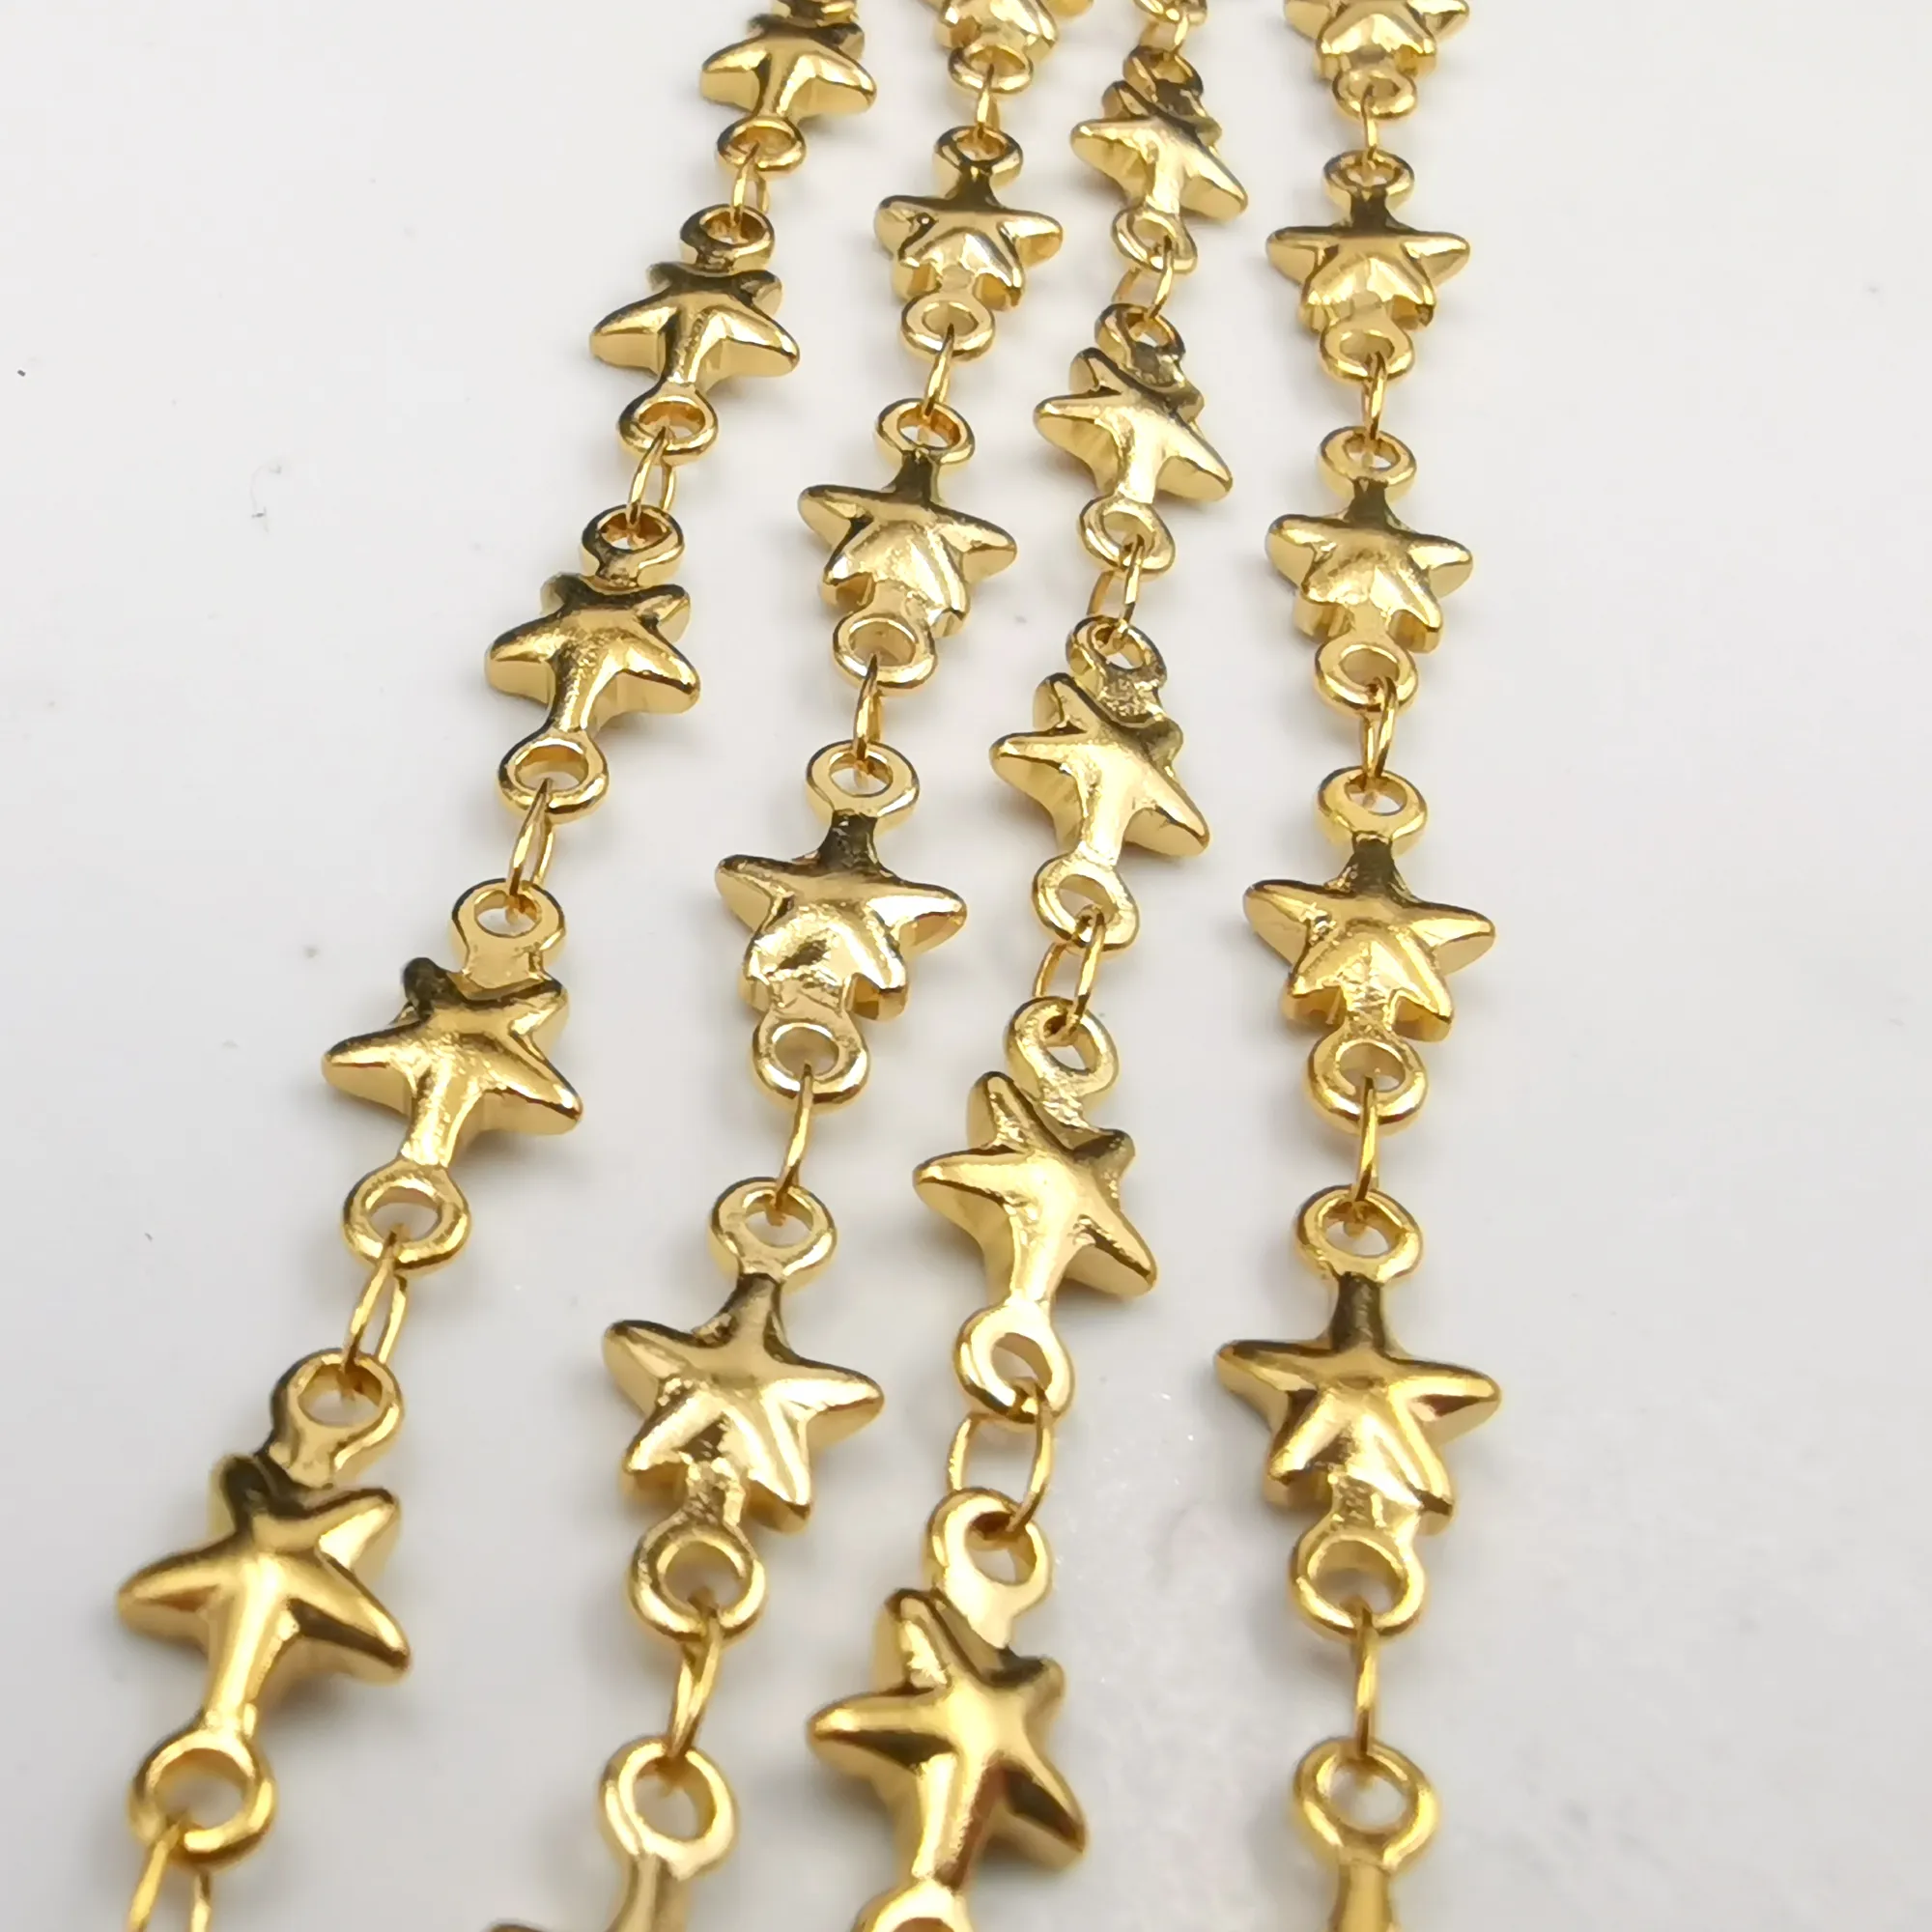 5meter Lot in Bulk 5mm Gold Stainless Steel Chains Welded Star Link Chain Roll Necklace Jewelry Findings Making DIY